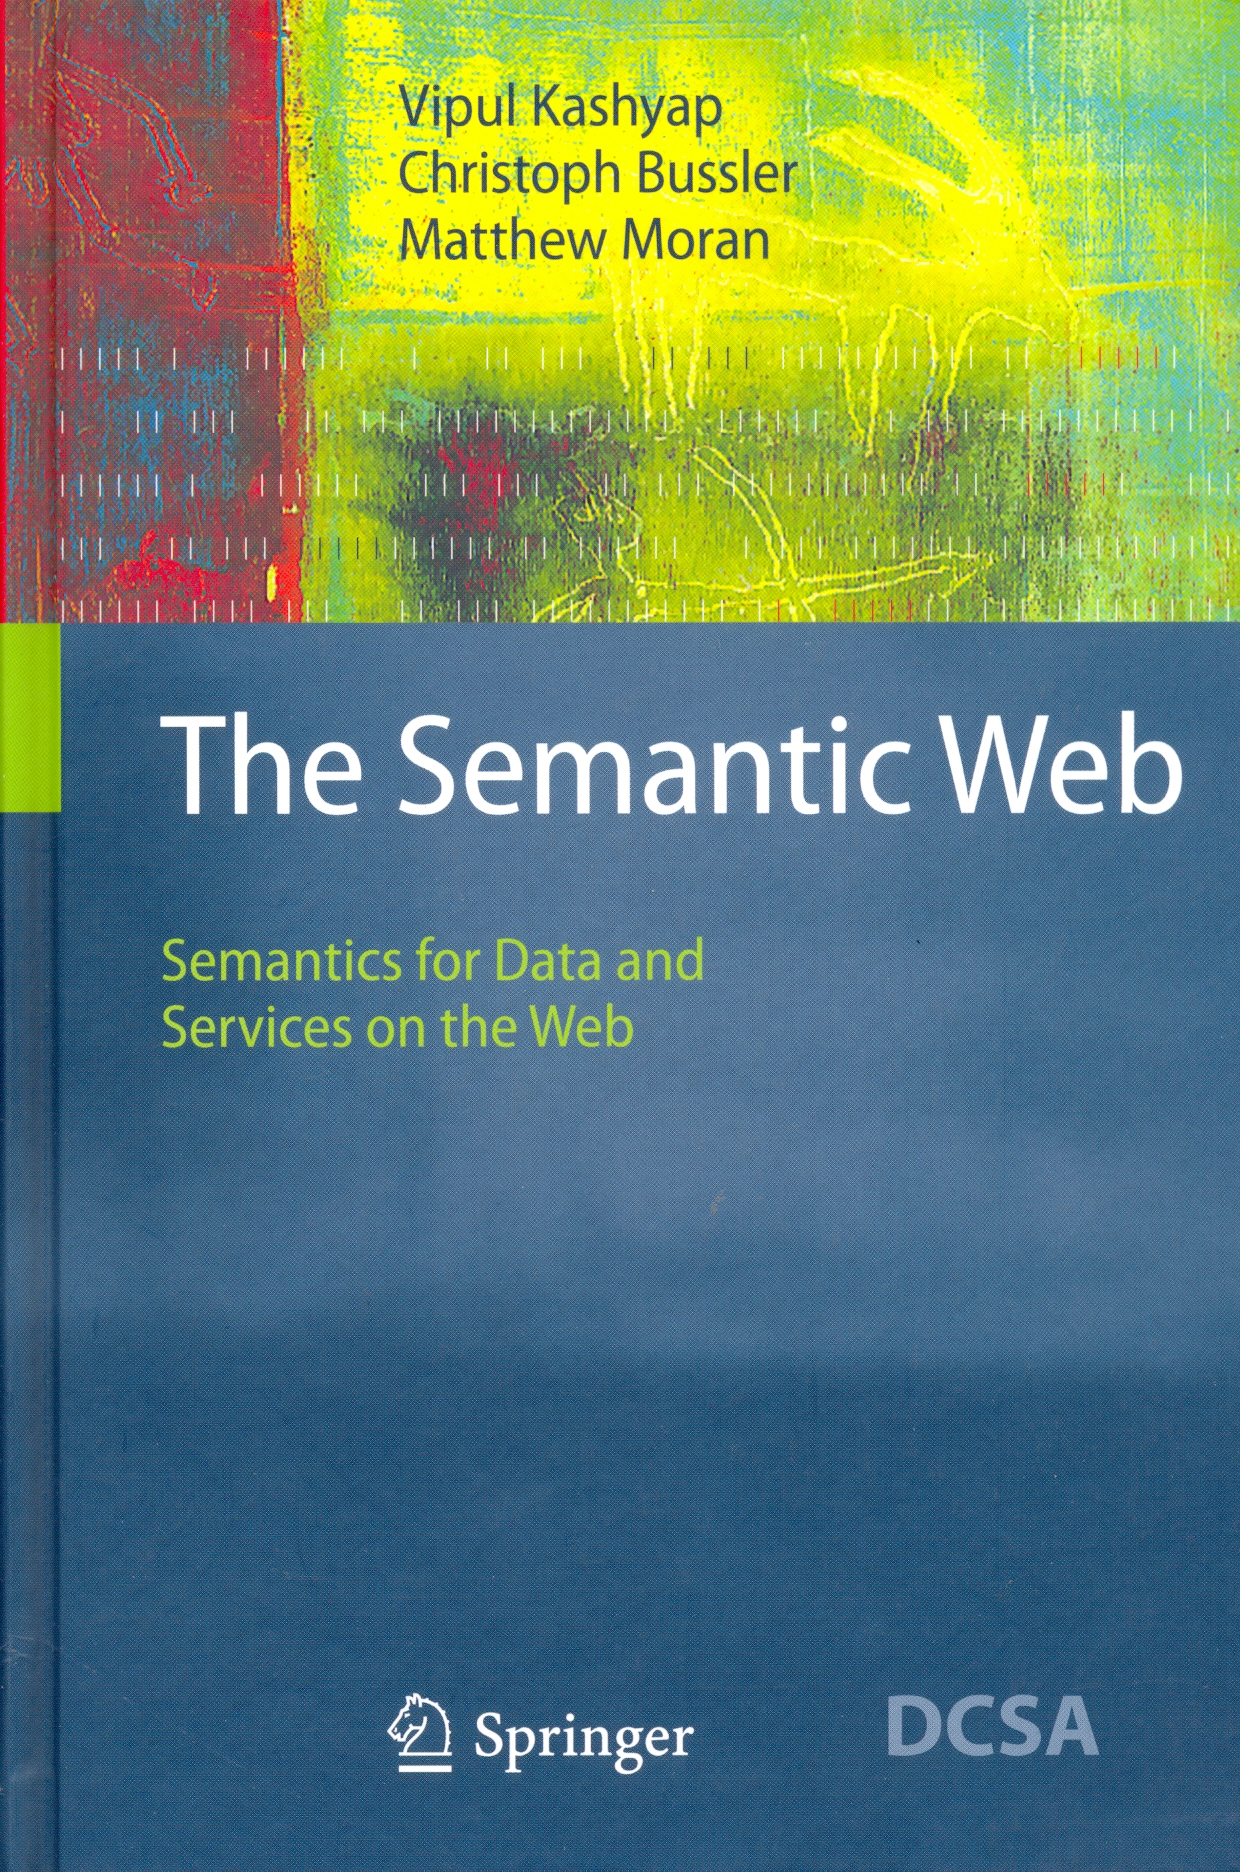 The Semantic Web: Semantics for Data and Services on the Web